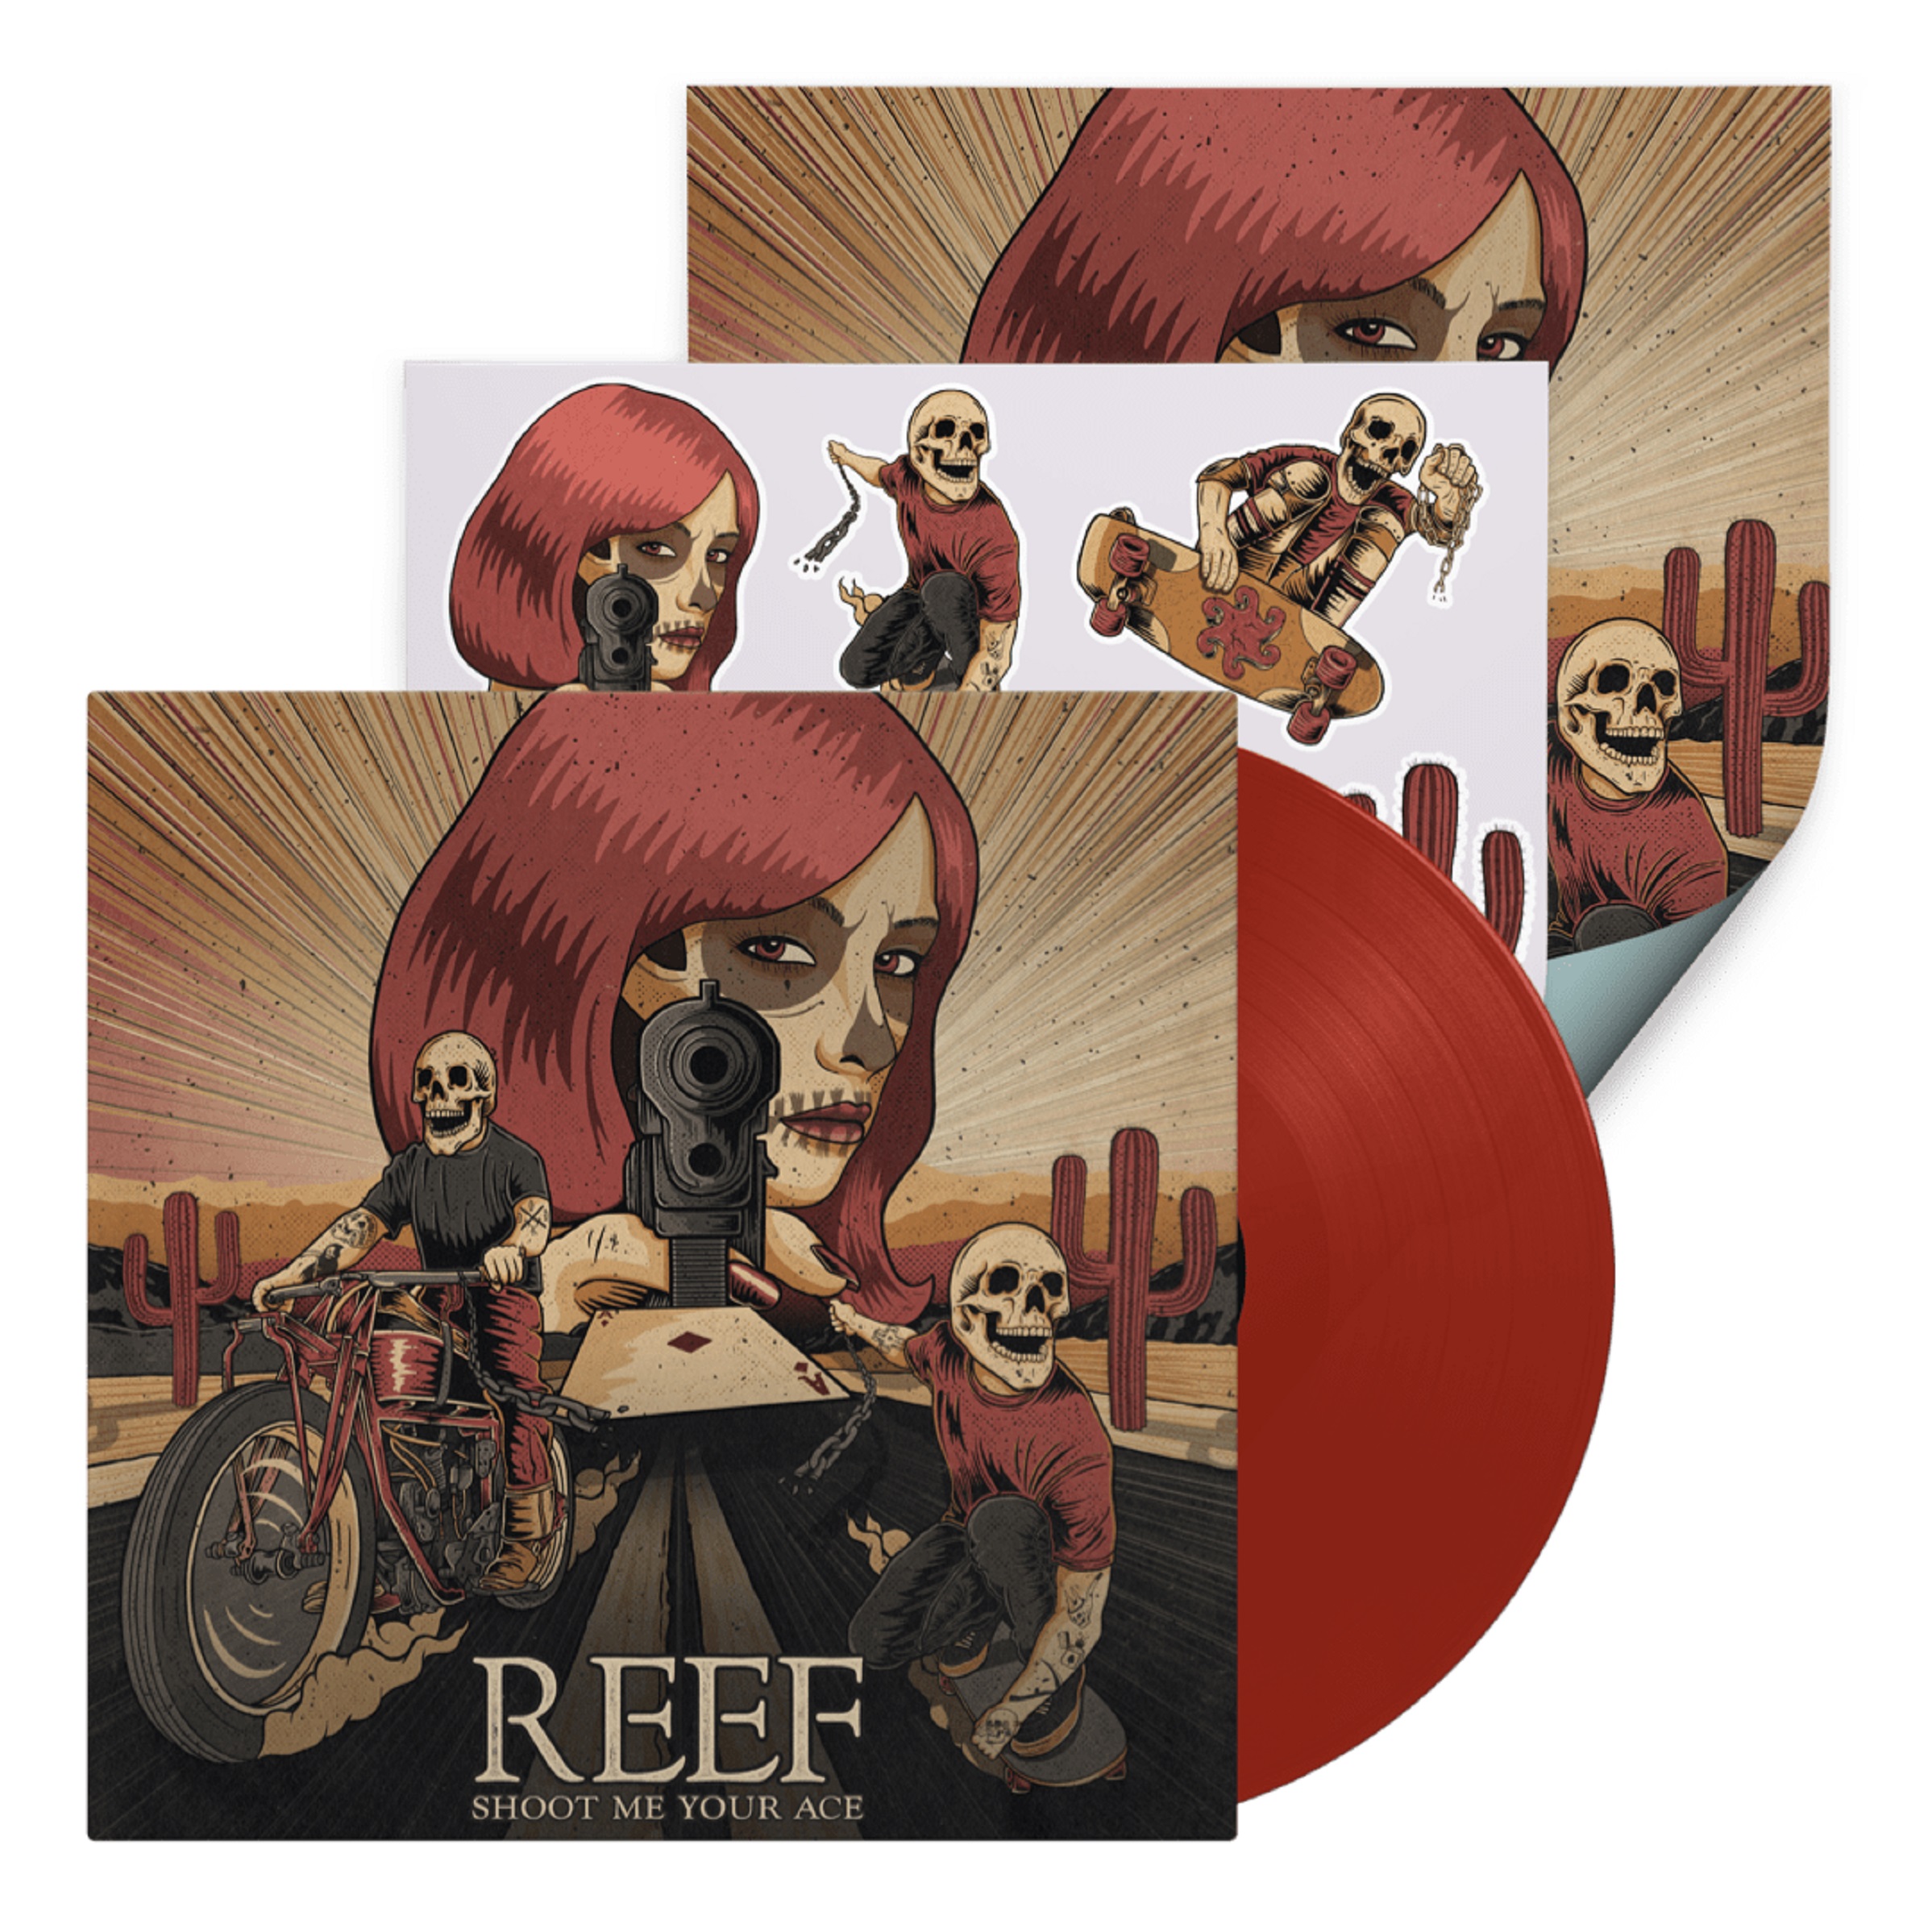 Reef's new album 'Shoot Me Your Ace' released to critical acclaim